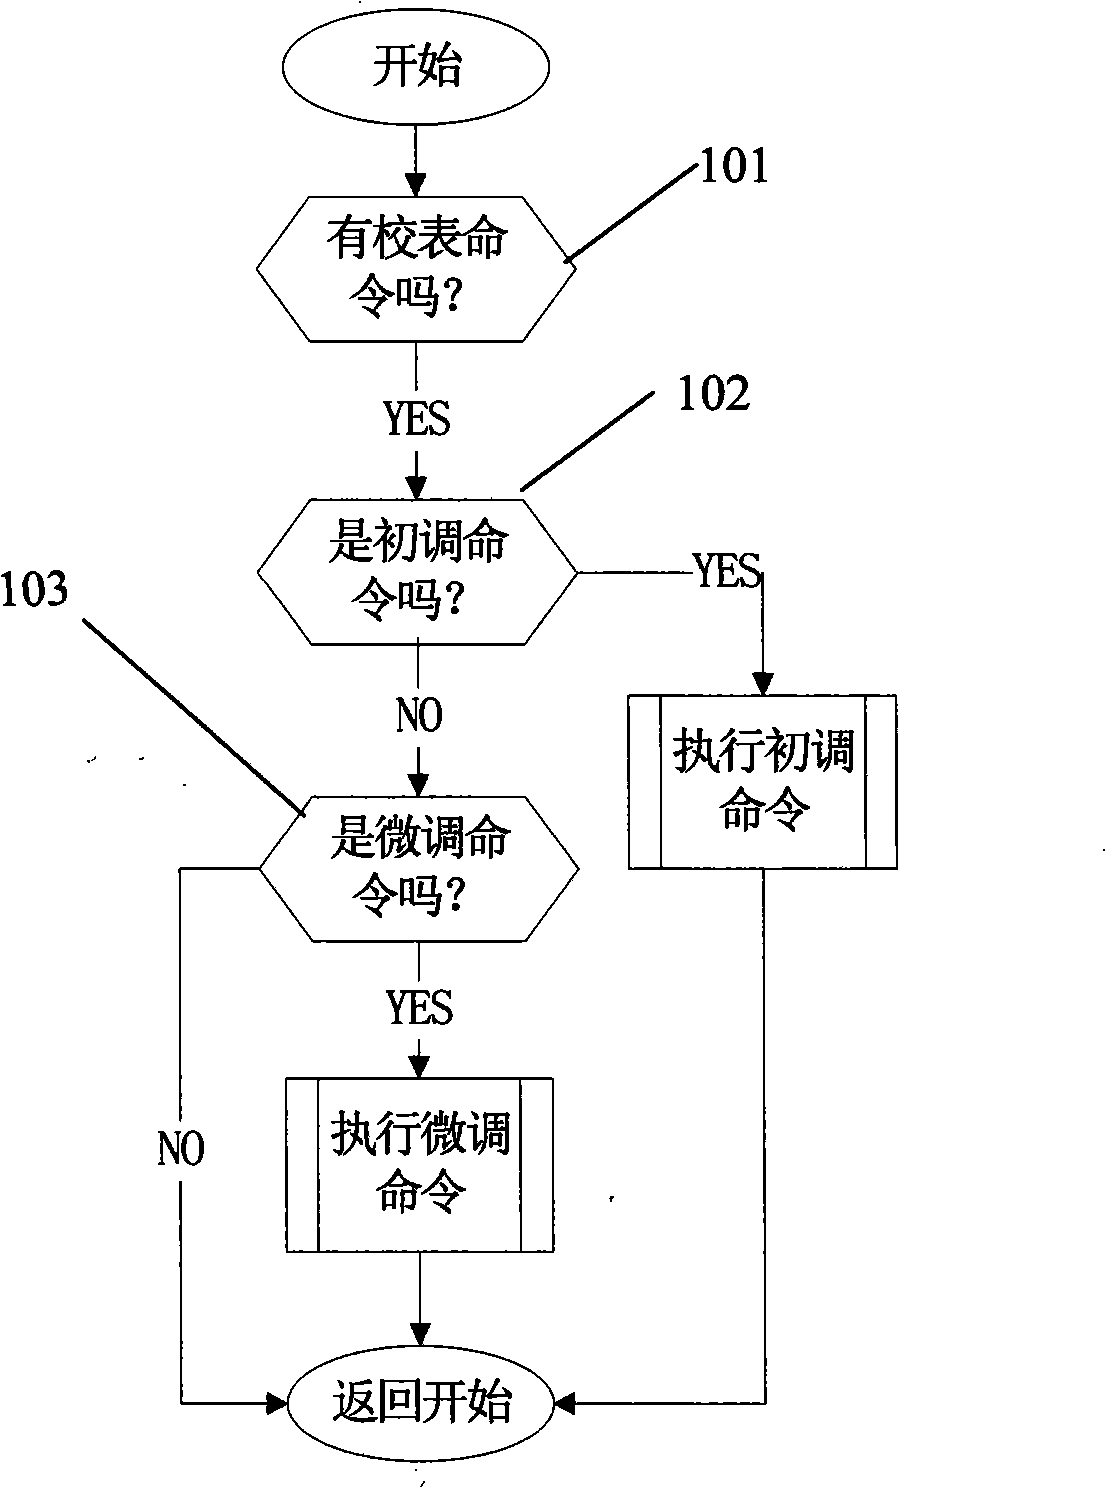 Auto calibration method for single-phase electronic type electric energy meter